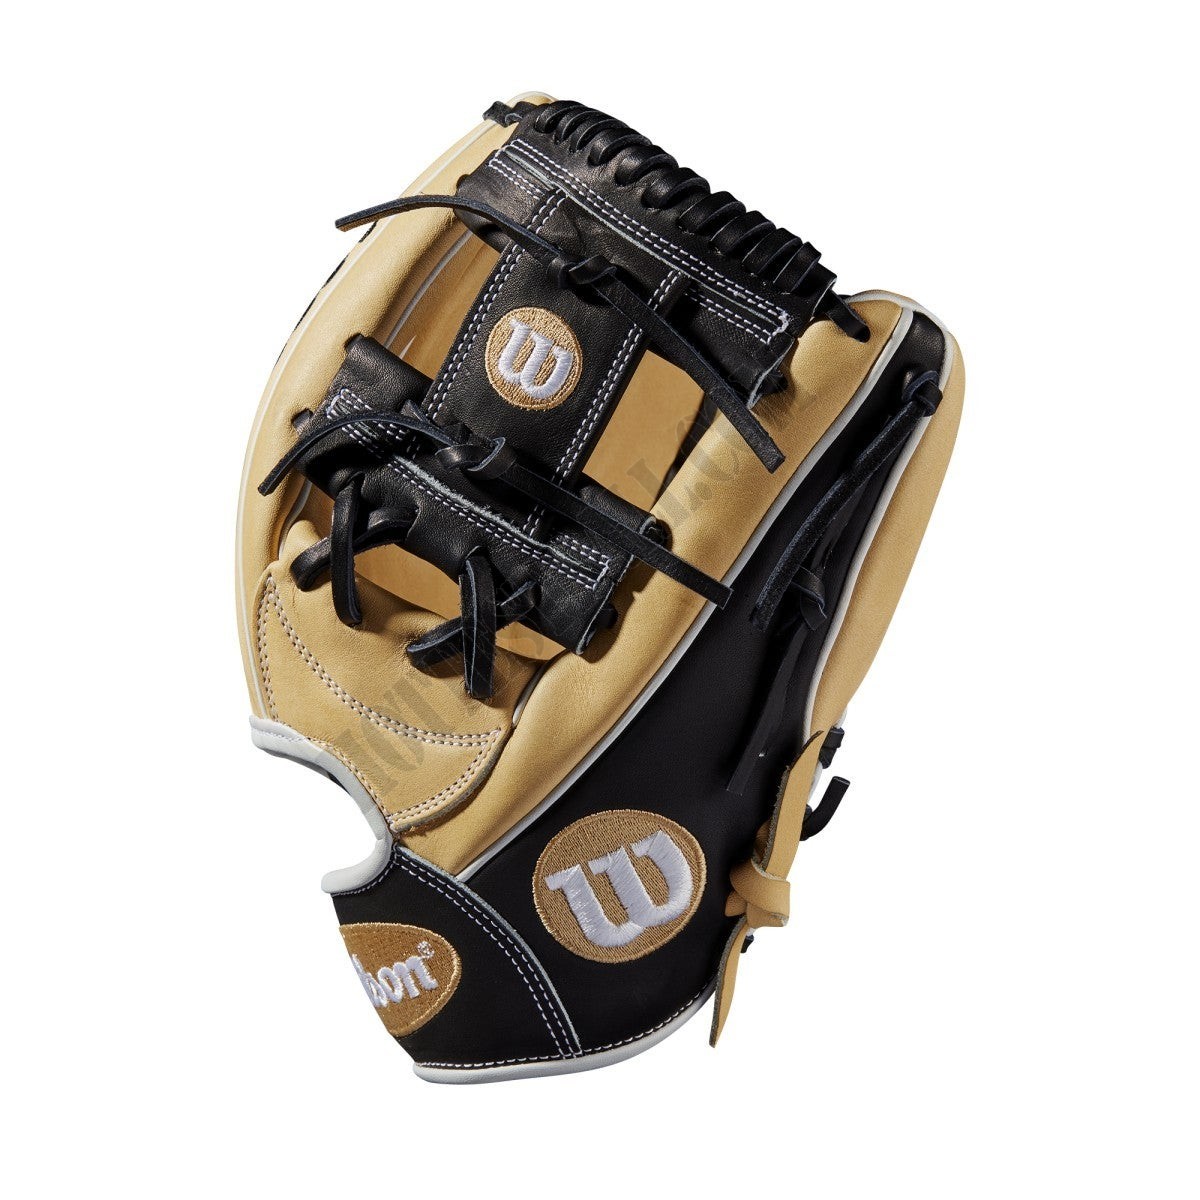 2019 A2000 1787 11.75" Infield Baseball Glove - Right Hand Throw ● Wilson Promotions - -3